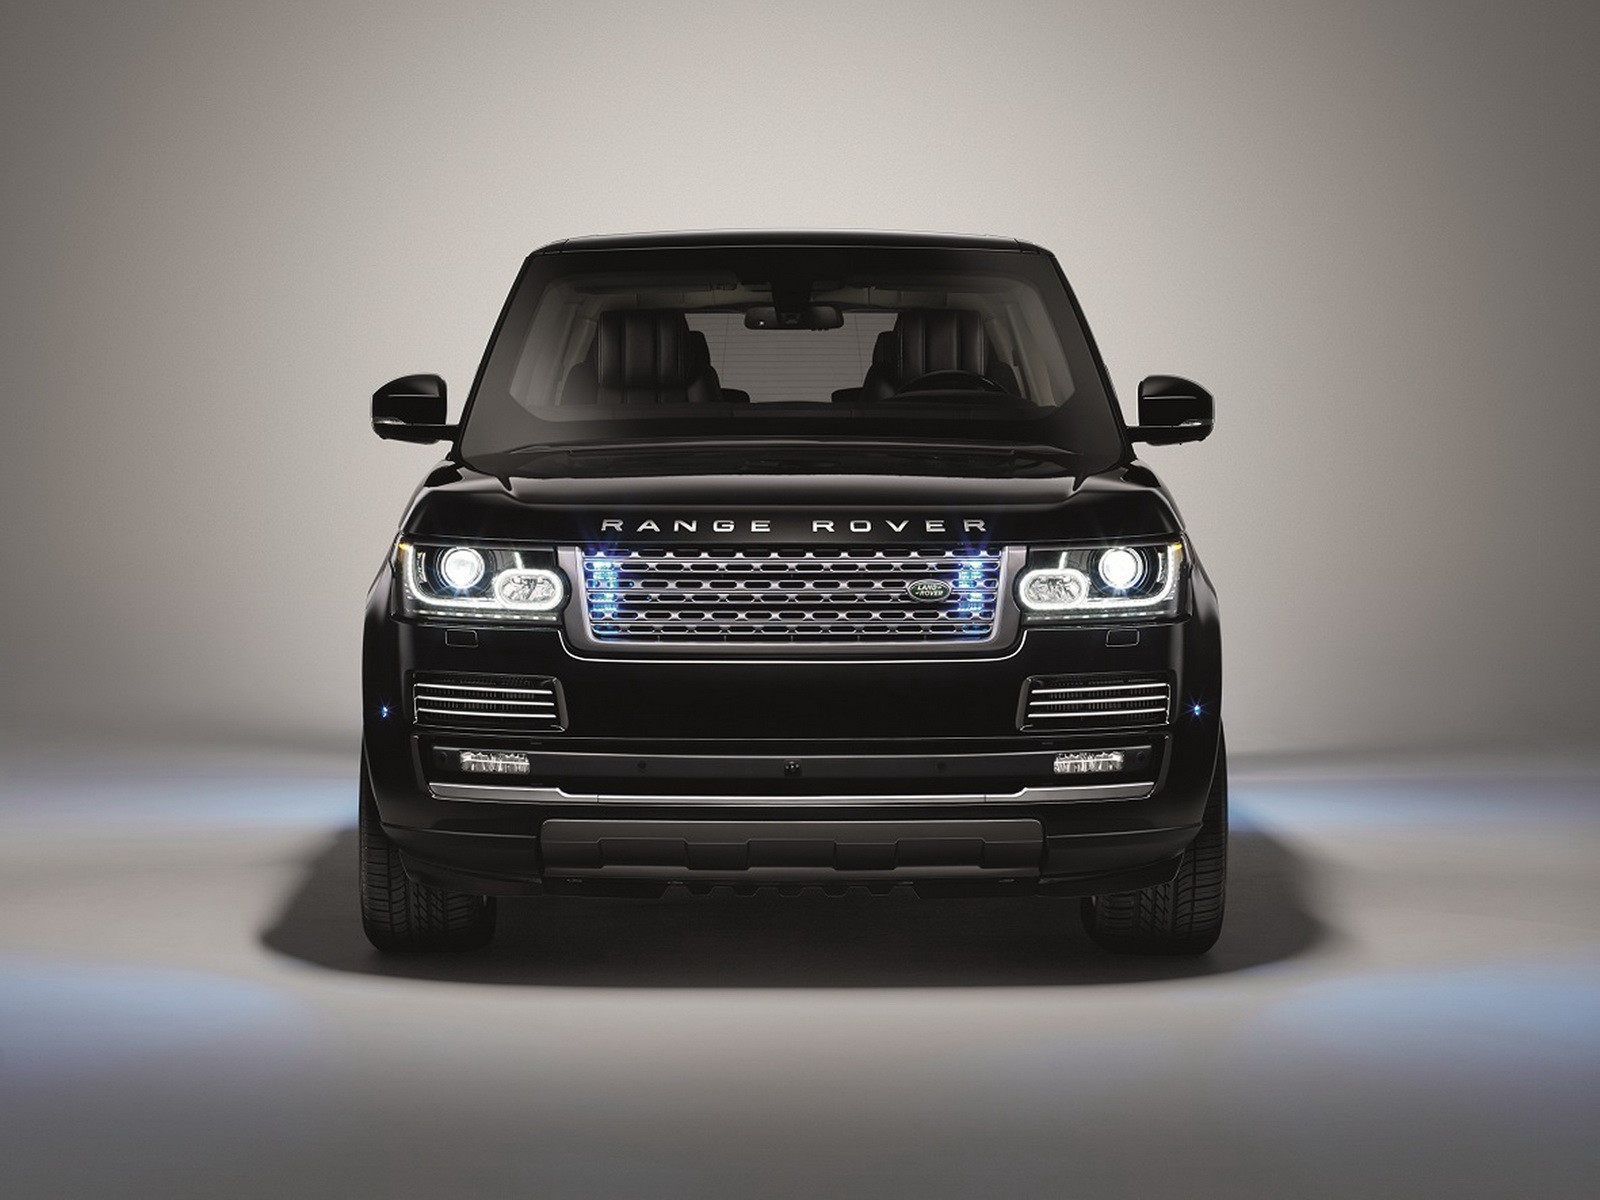 An armoured Range Rover was shown